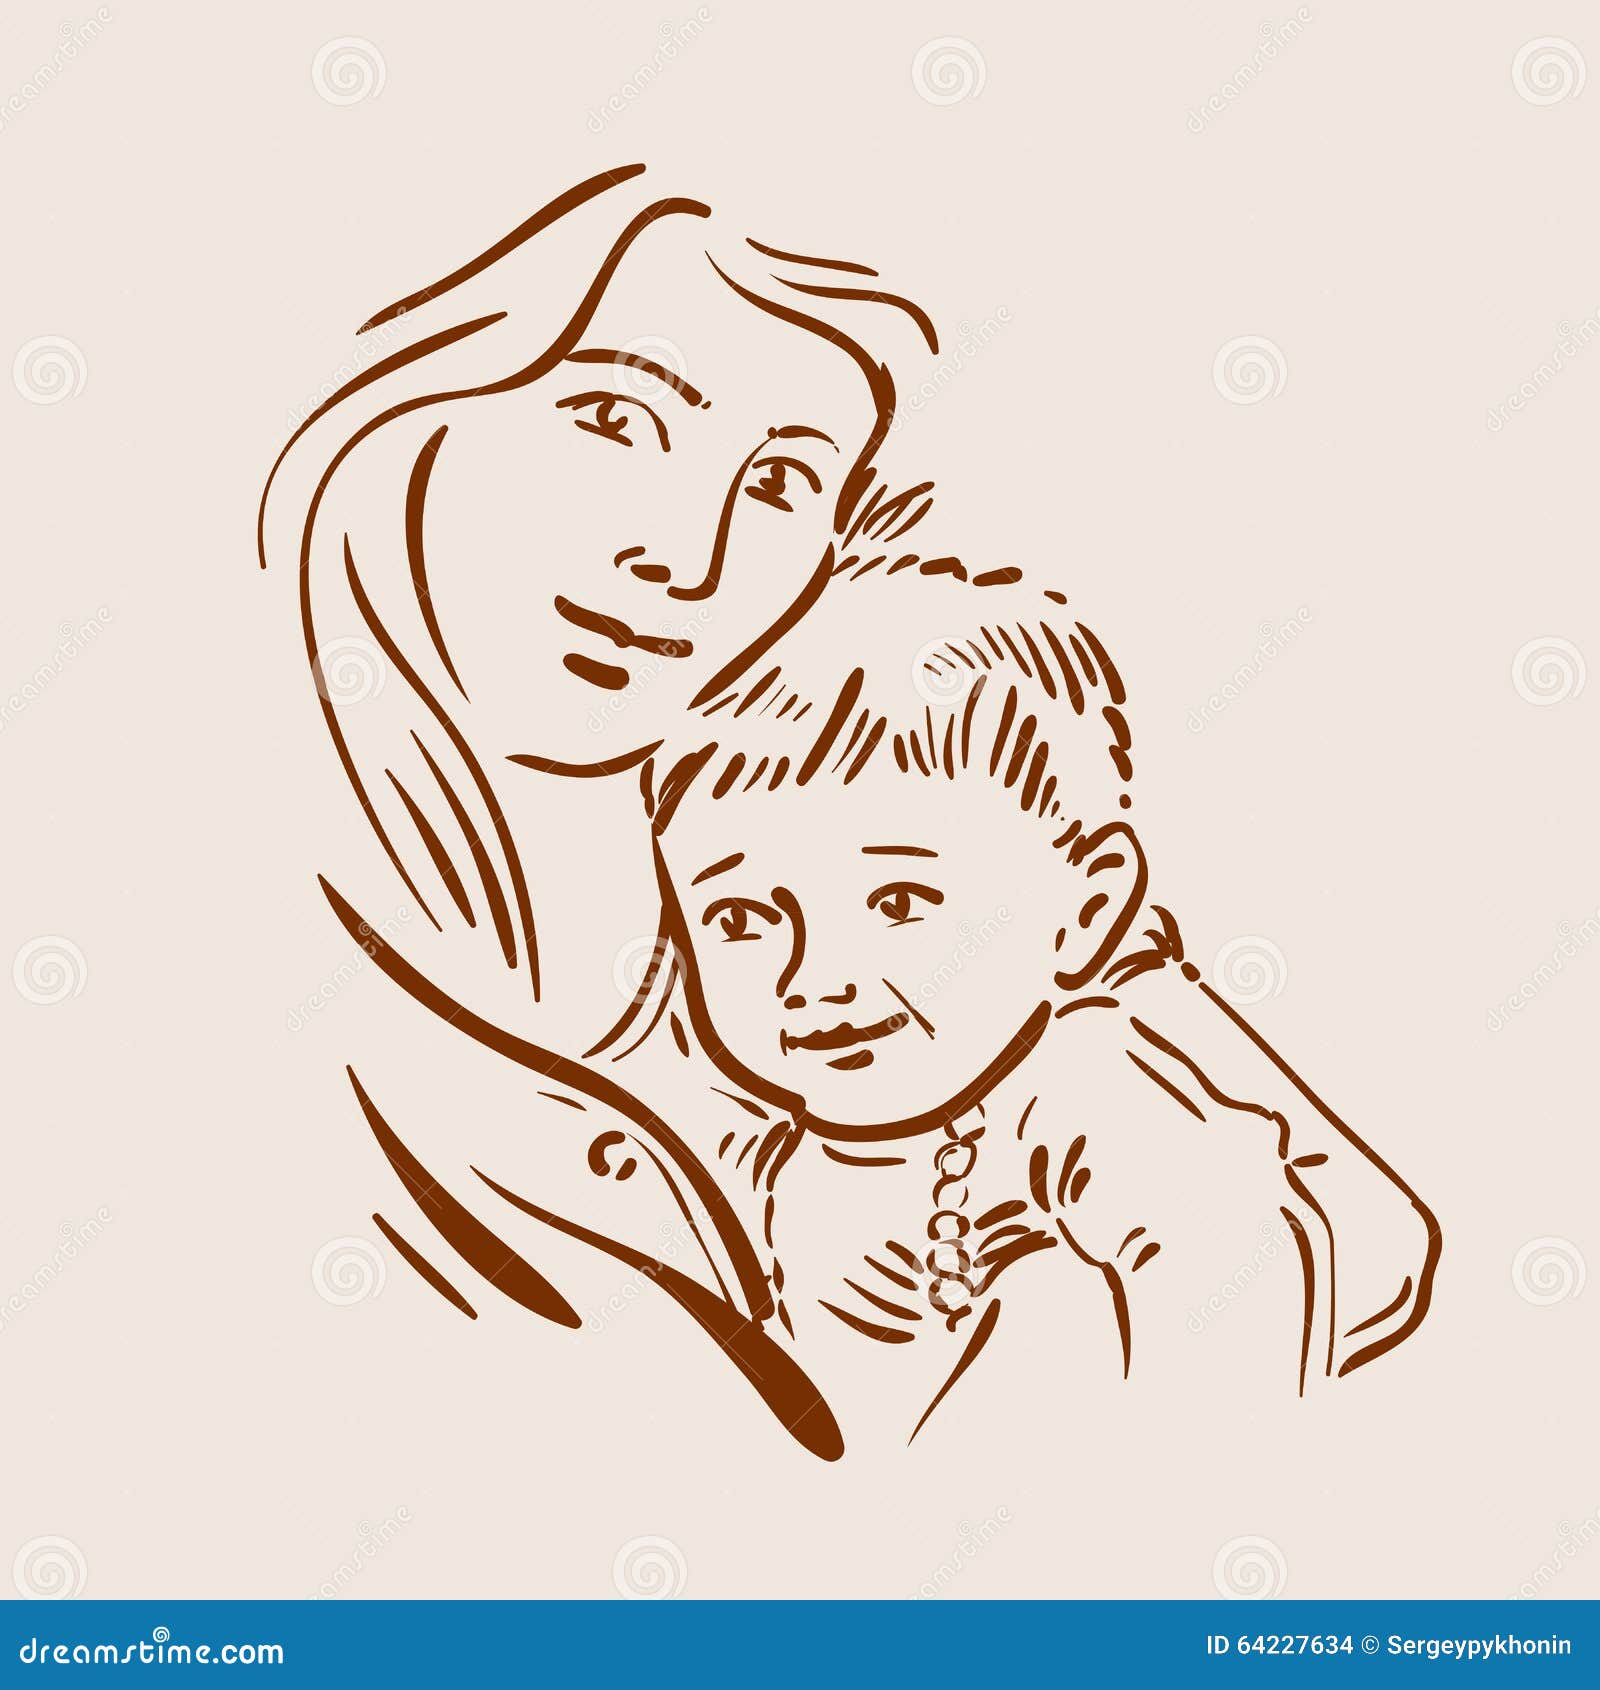 mother and baby Pencil drawing / motherdaysdrawing - YouTube